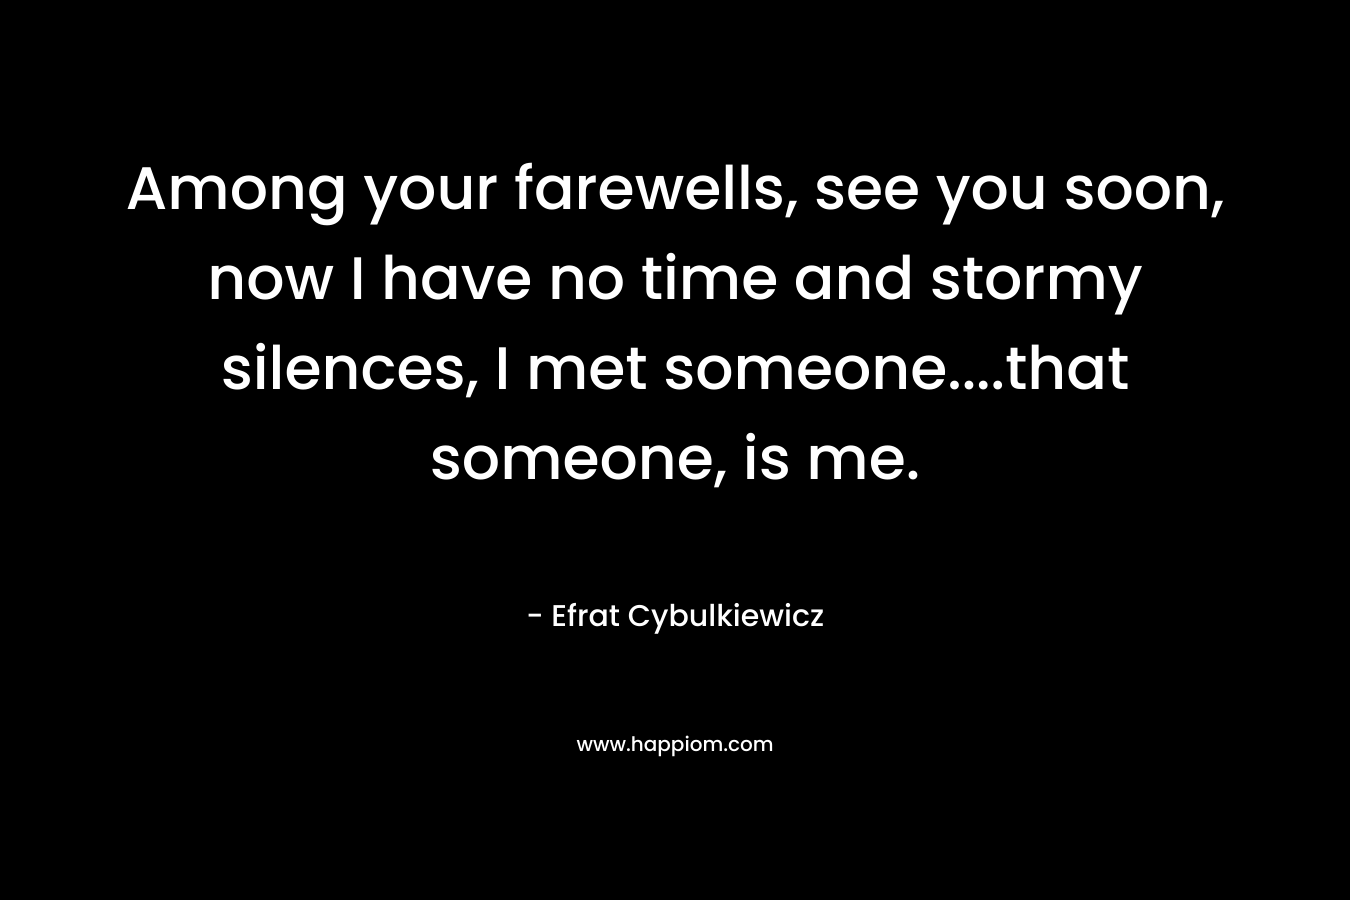 Among your farewells, see you soon, now I have no time and stormy silences, I met someone....that someone, is me.